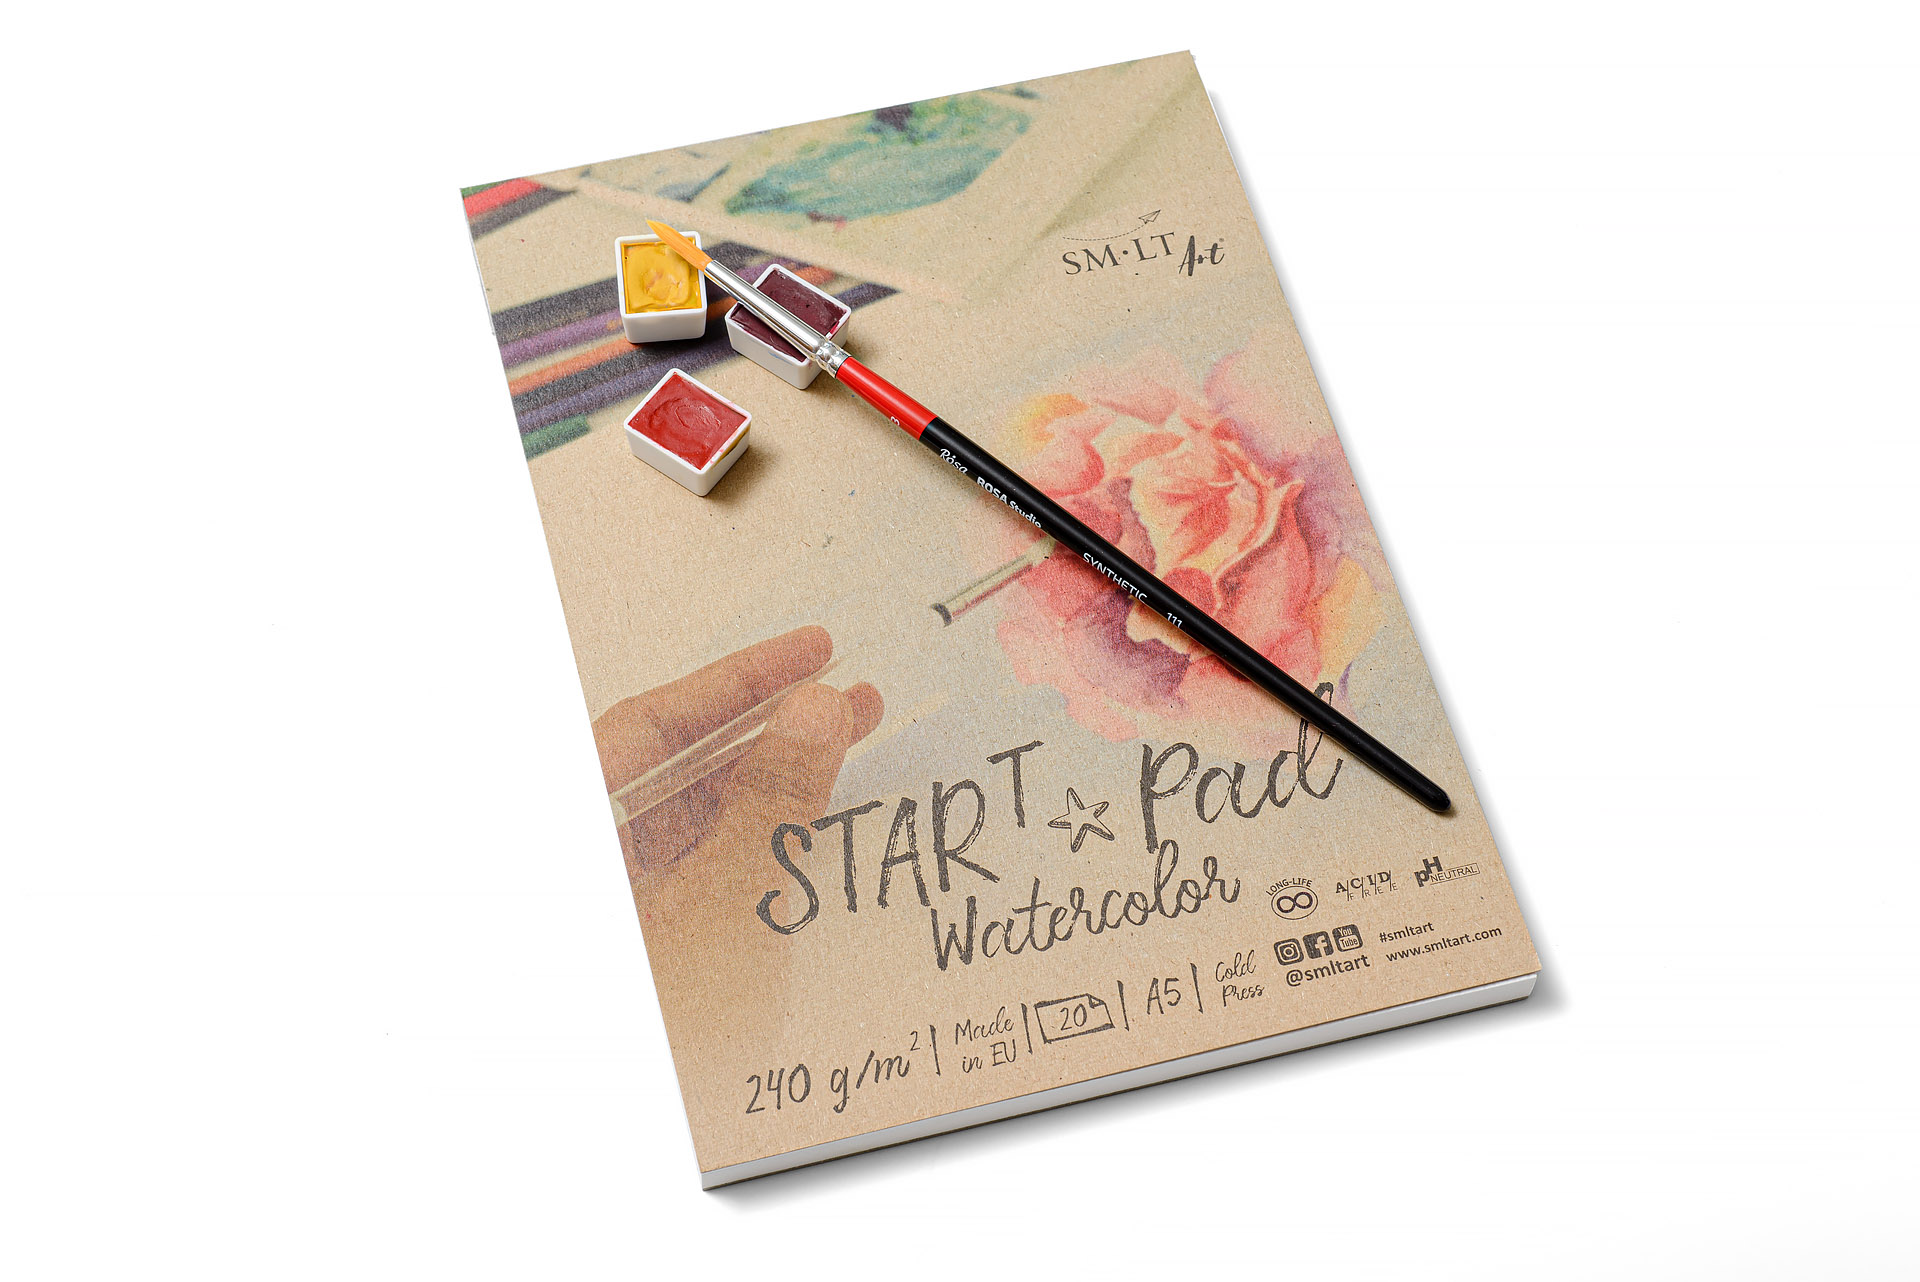 Water Color Pad A3 - 24 Sheets – Smart Stationery